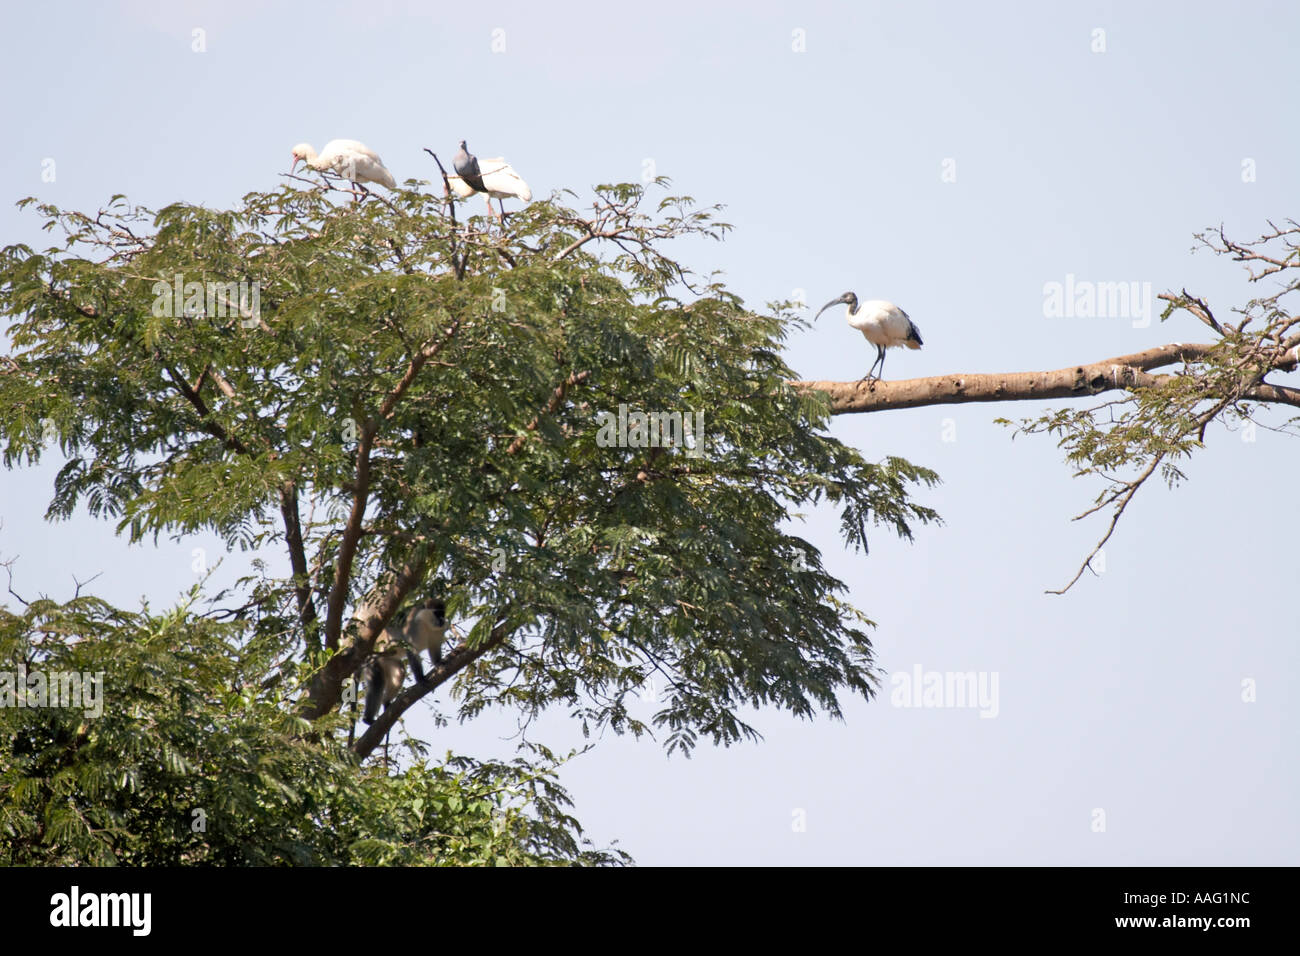 Spoonbill and Sacred ibis in a tree with monkey approaching near Kuch Ethiopia Afric Stock Photo